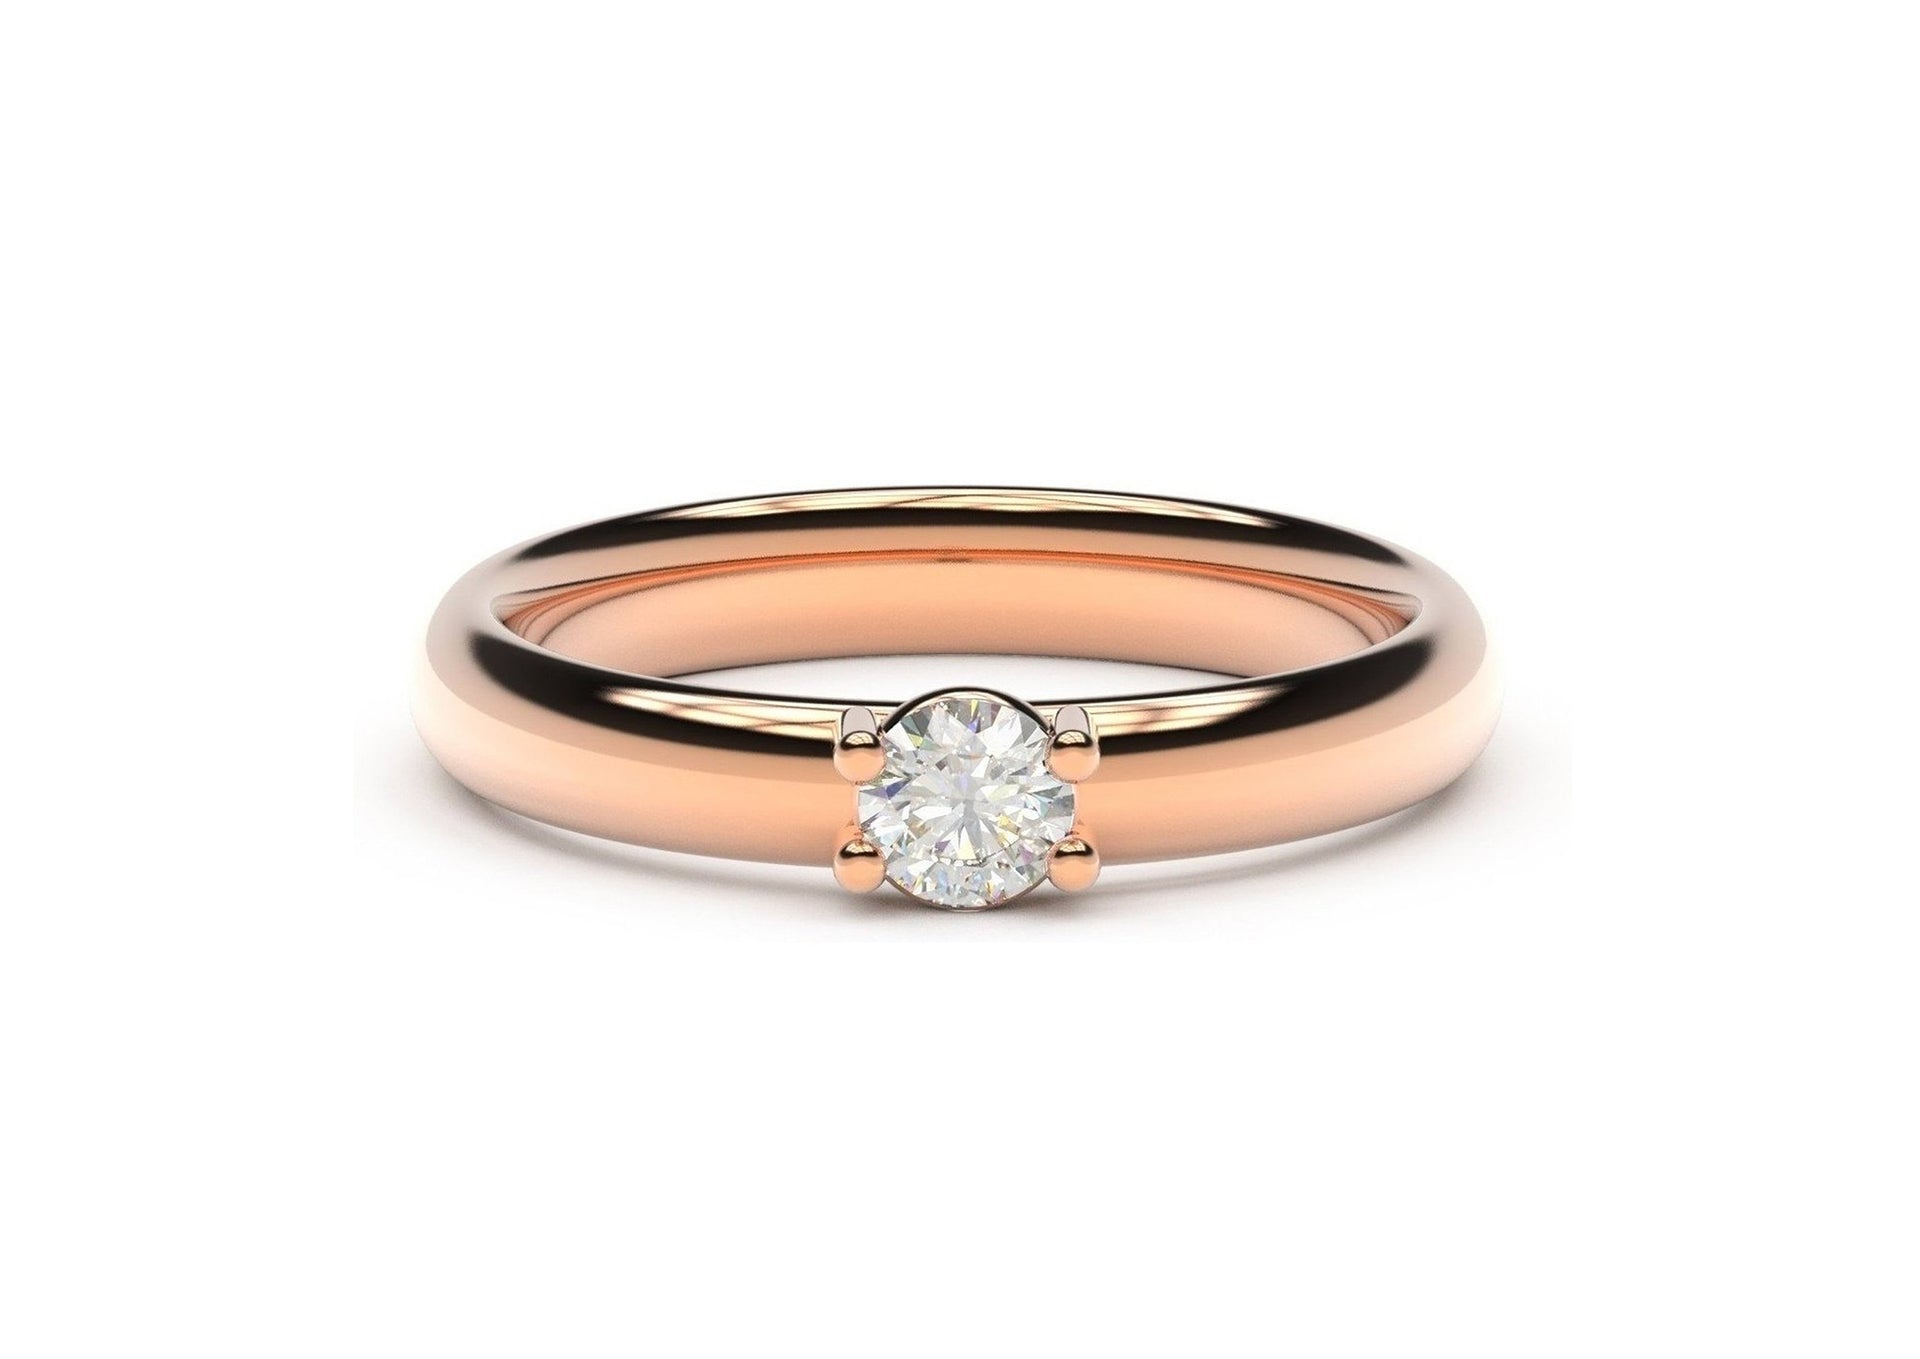 Contemporary Engagement Ring - Slim, Red Gold